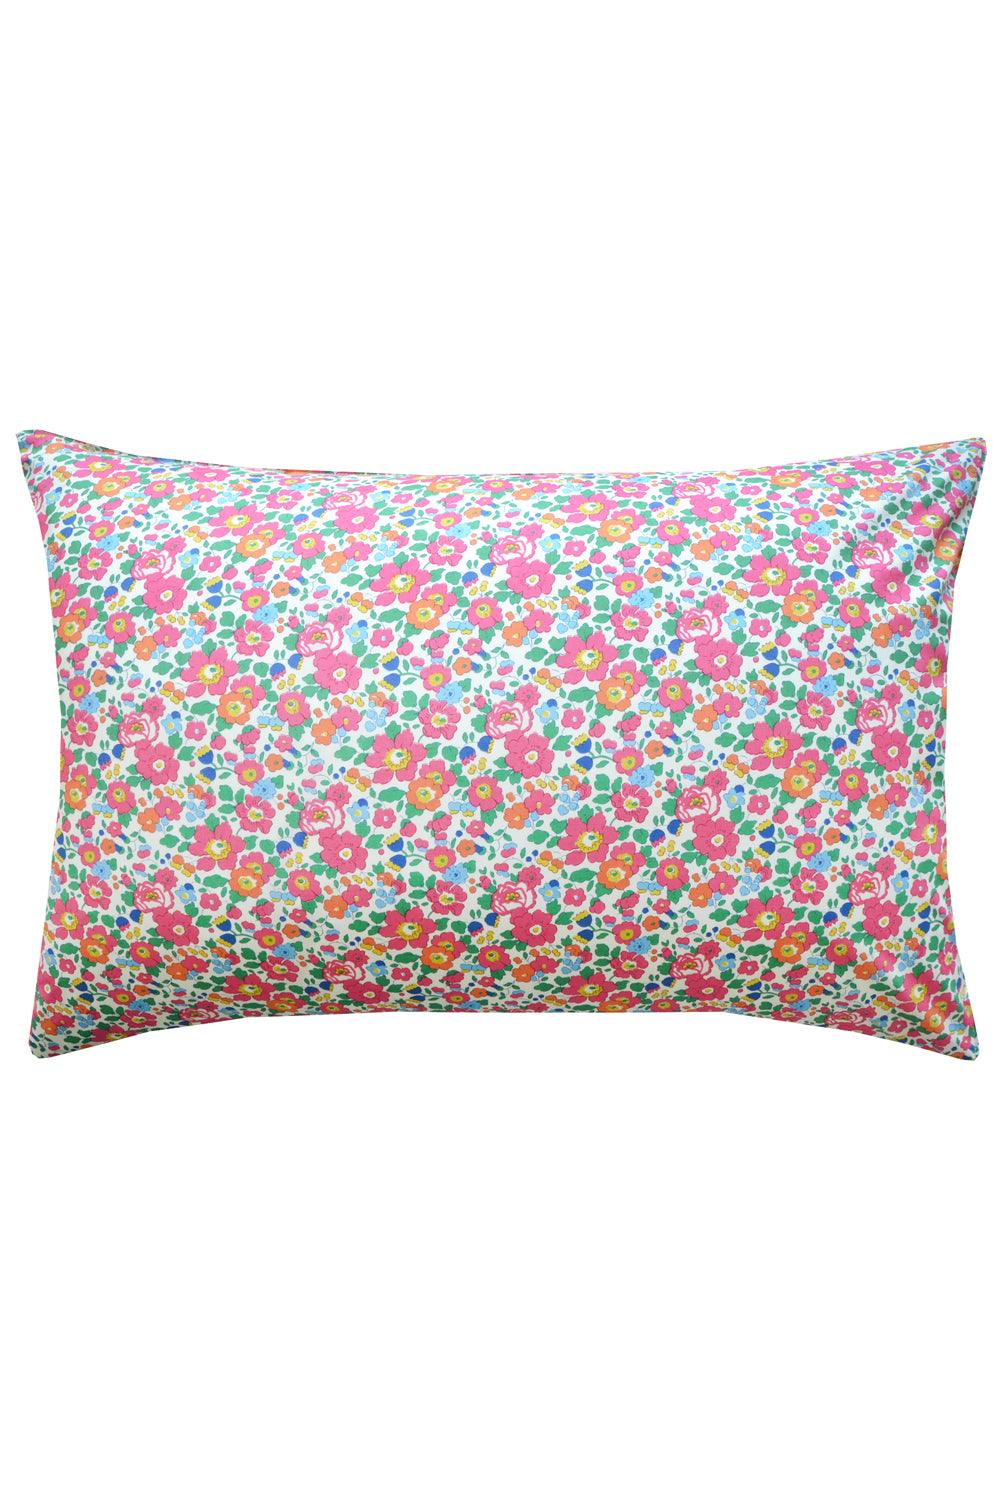 Bedding made with Liberty Fabric BETSY DEEP PINK - Coco & Wolf